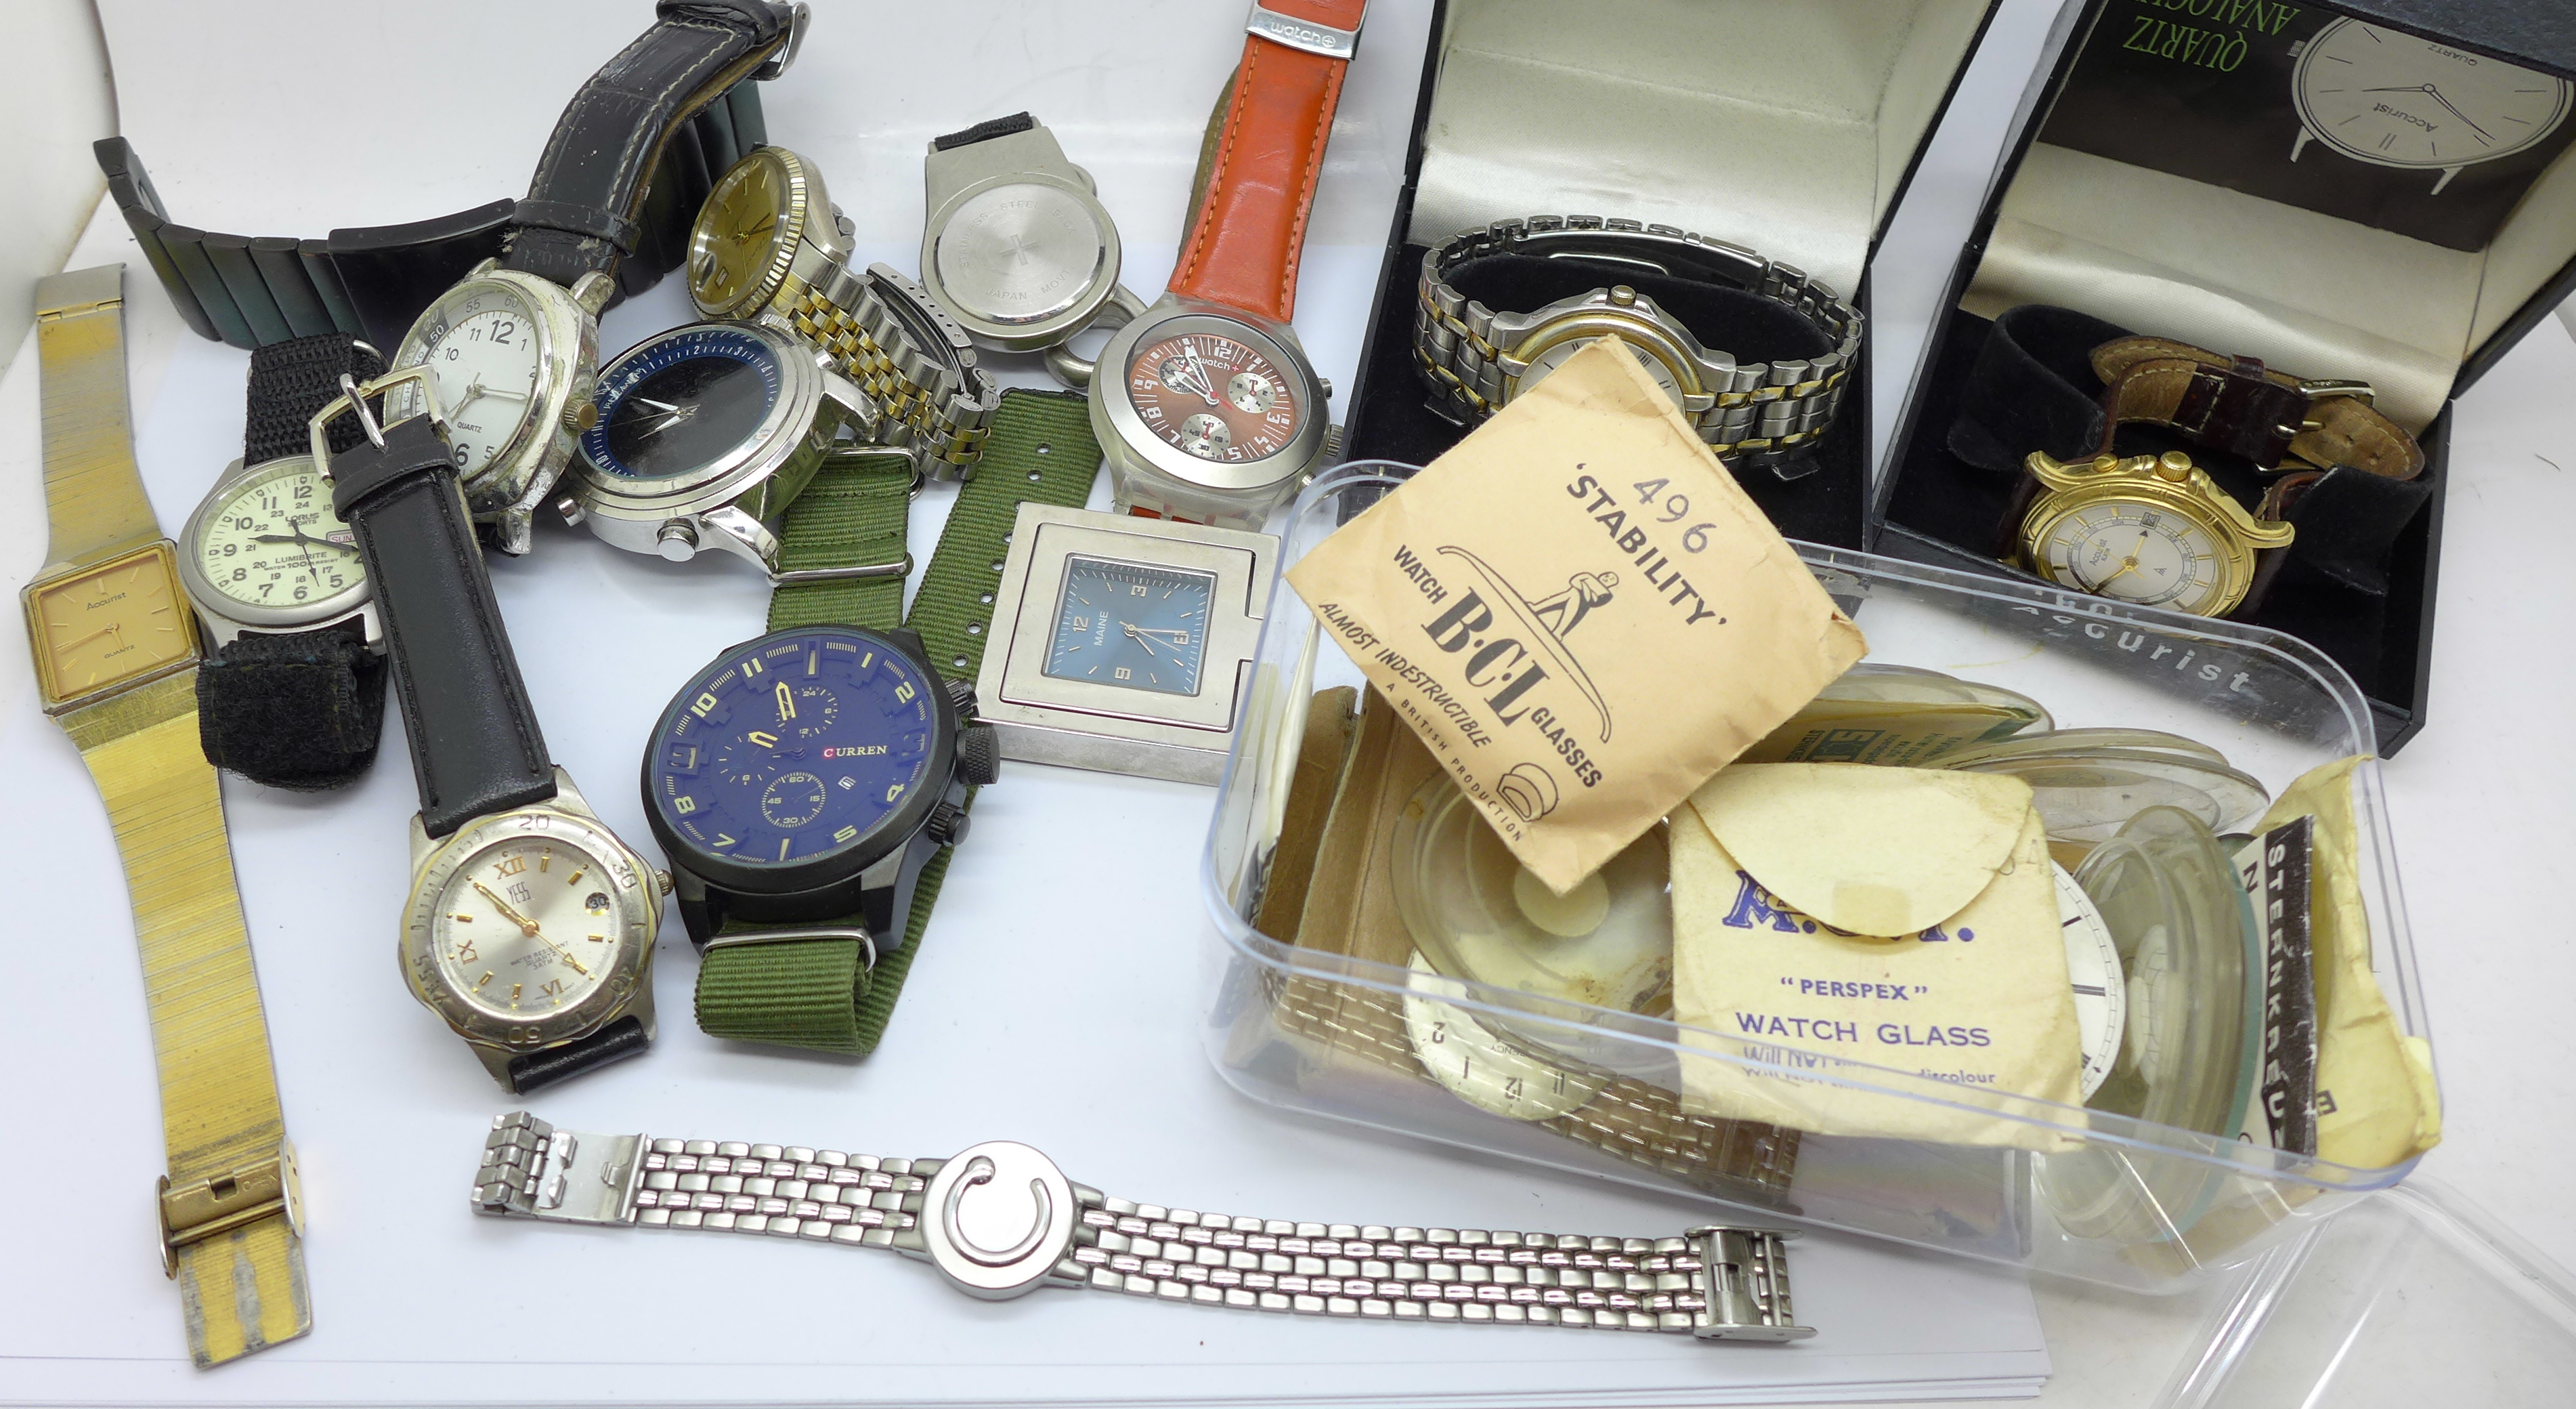 Wristwatches including Seiko and Accurist, watch glasses, etc. - Image 2 of 8